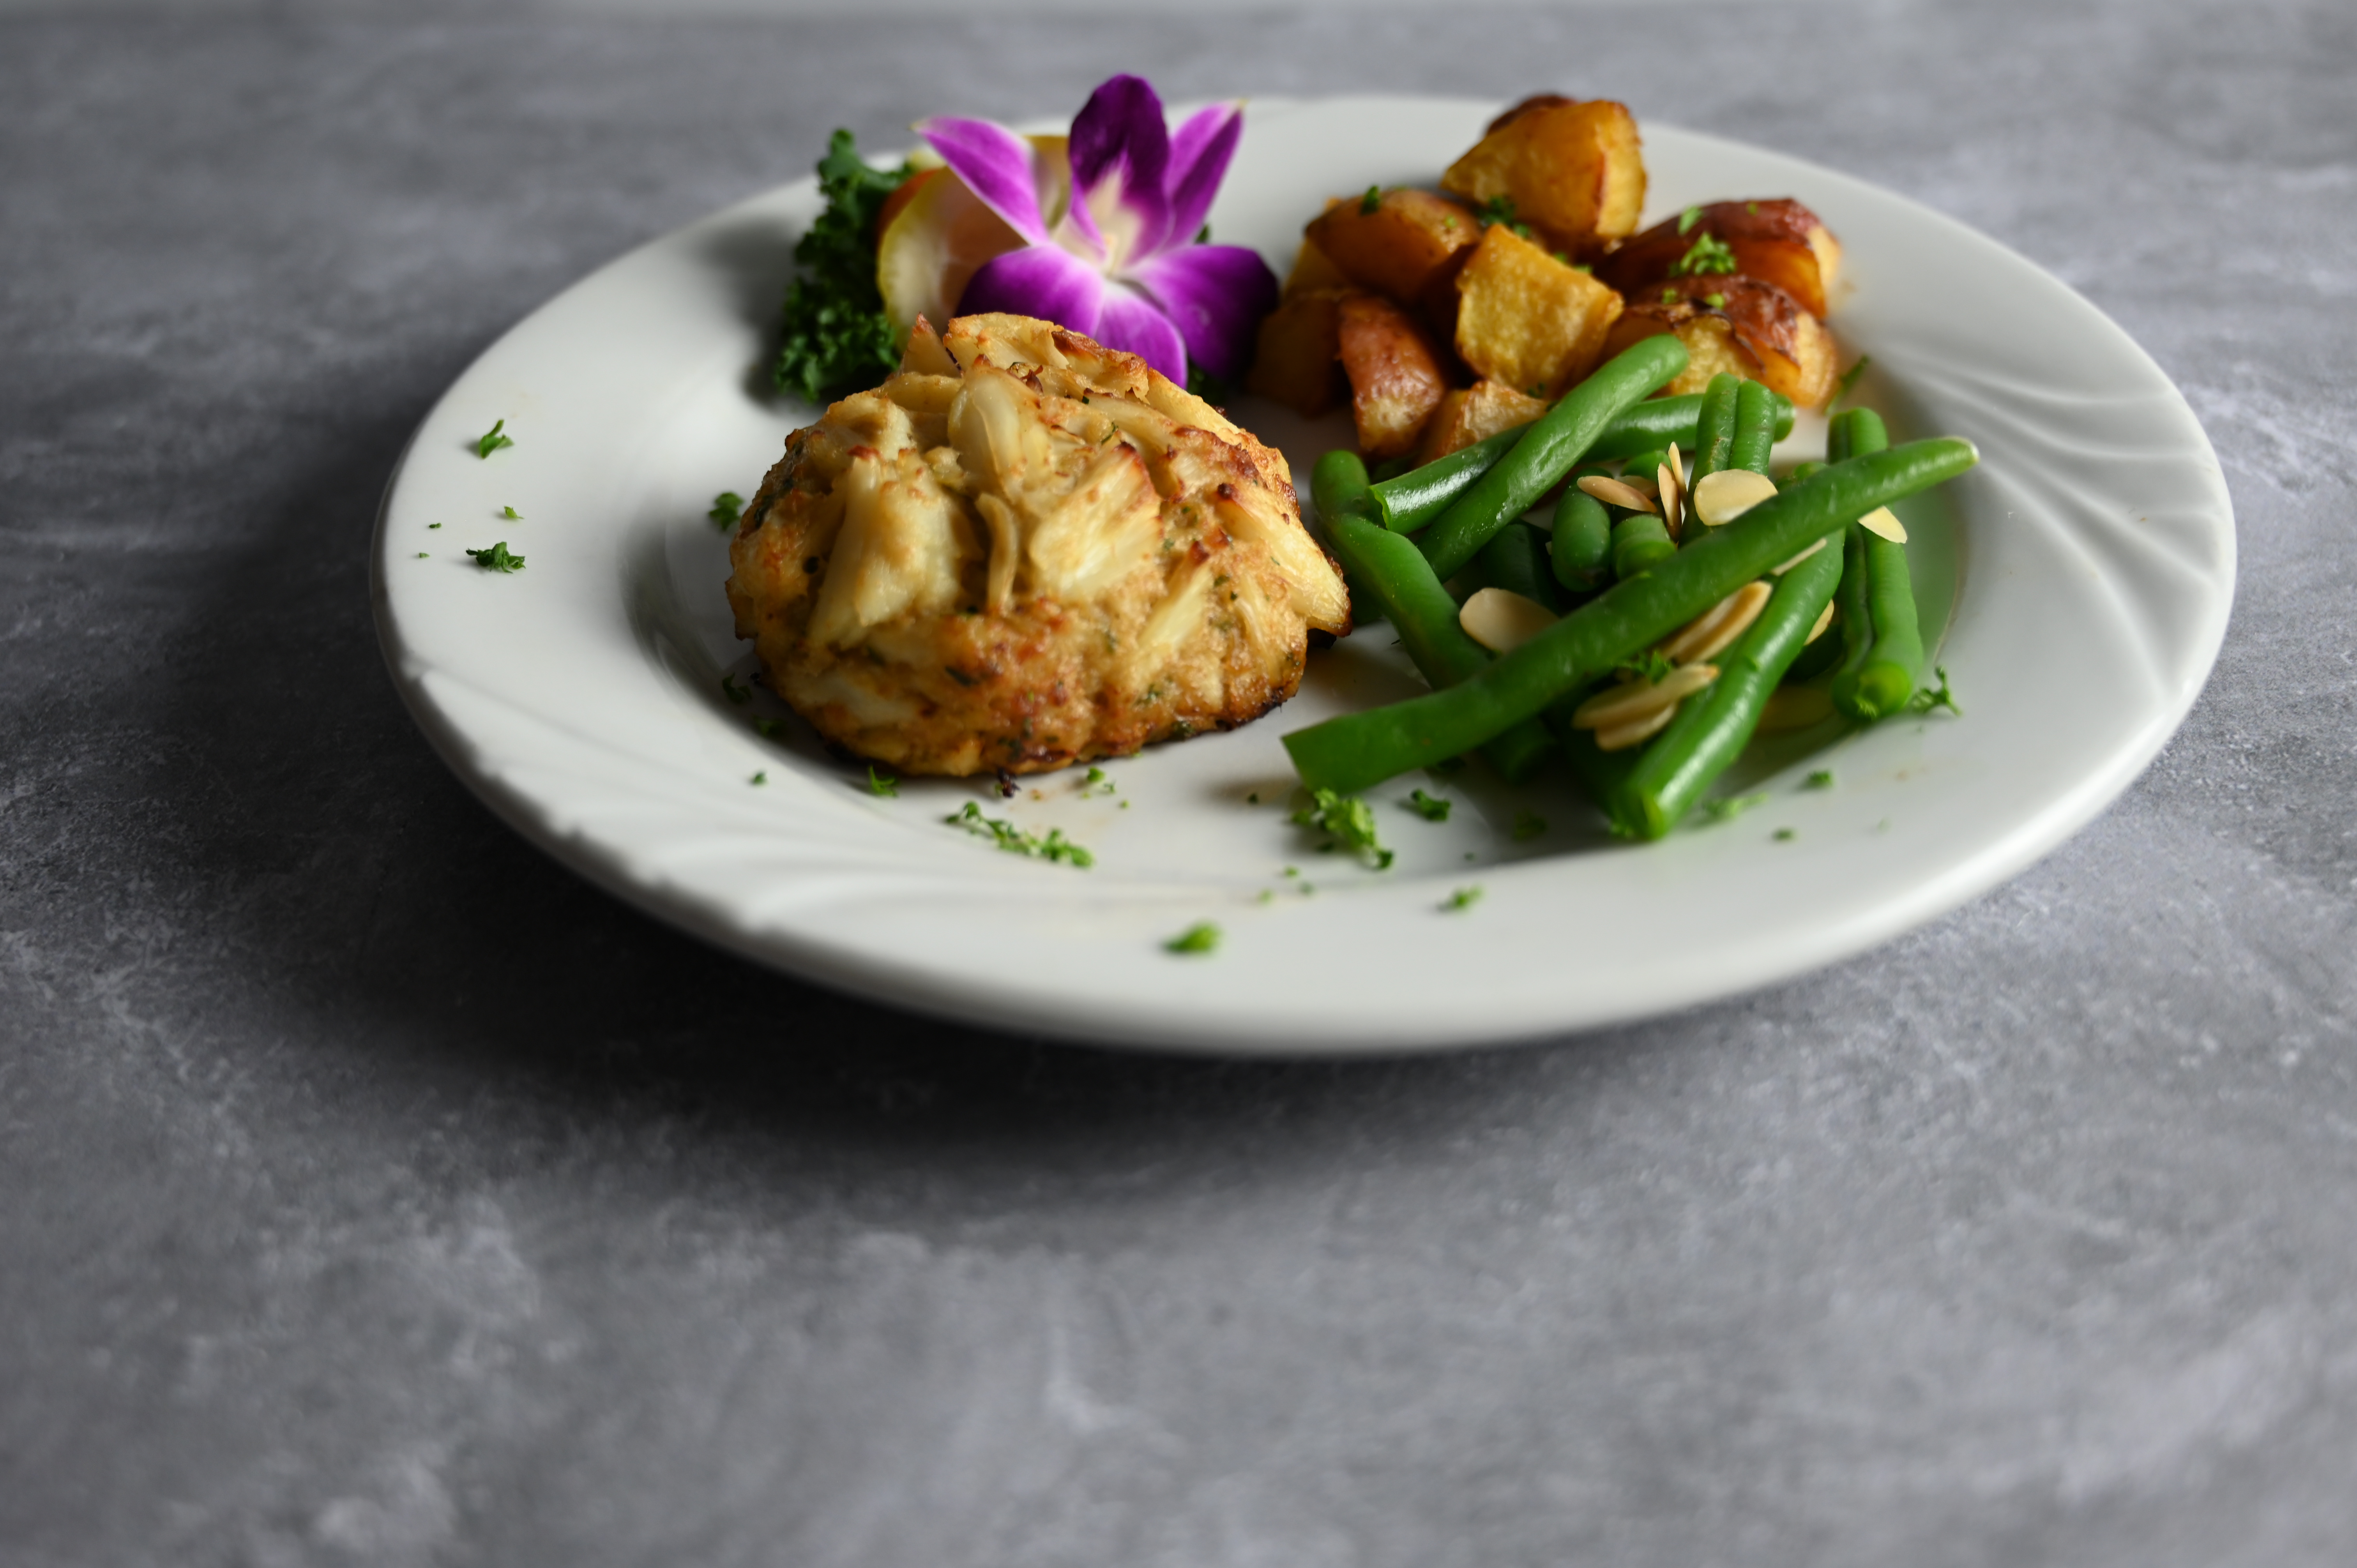 A crabcake on a plate with veggies